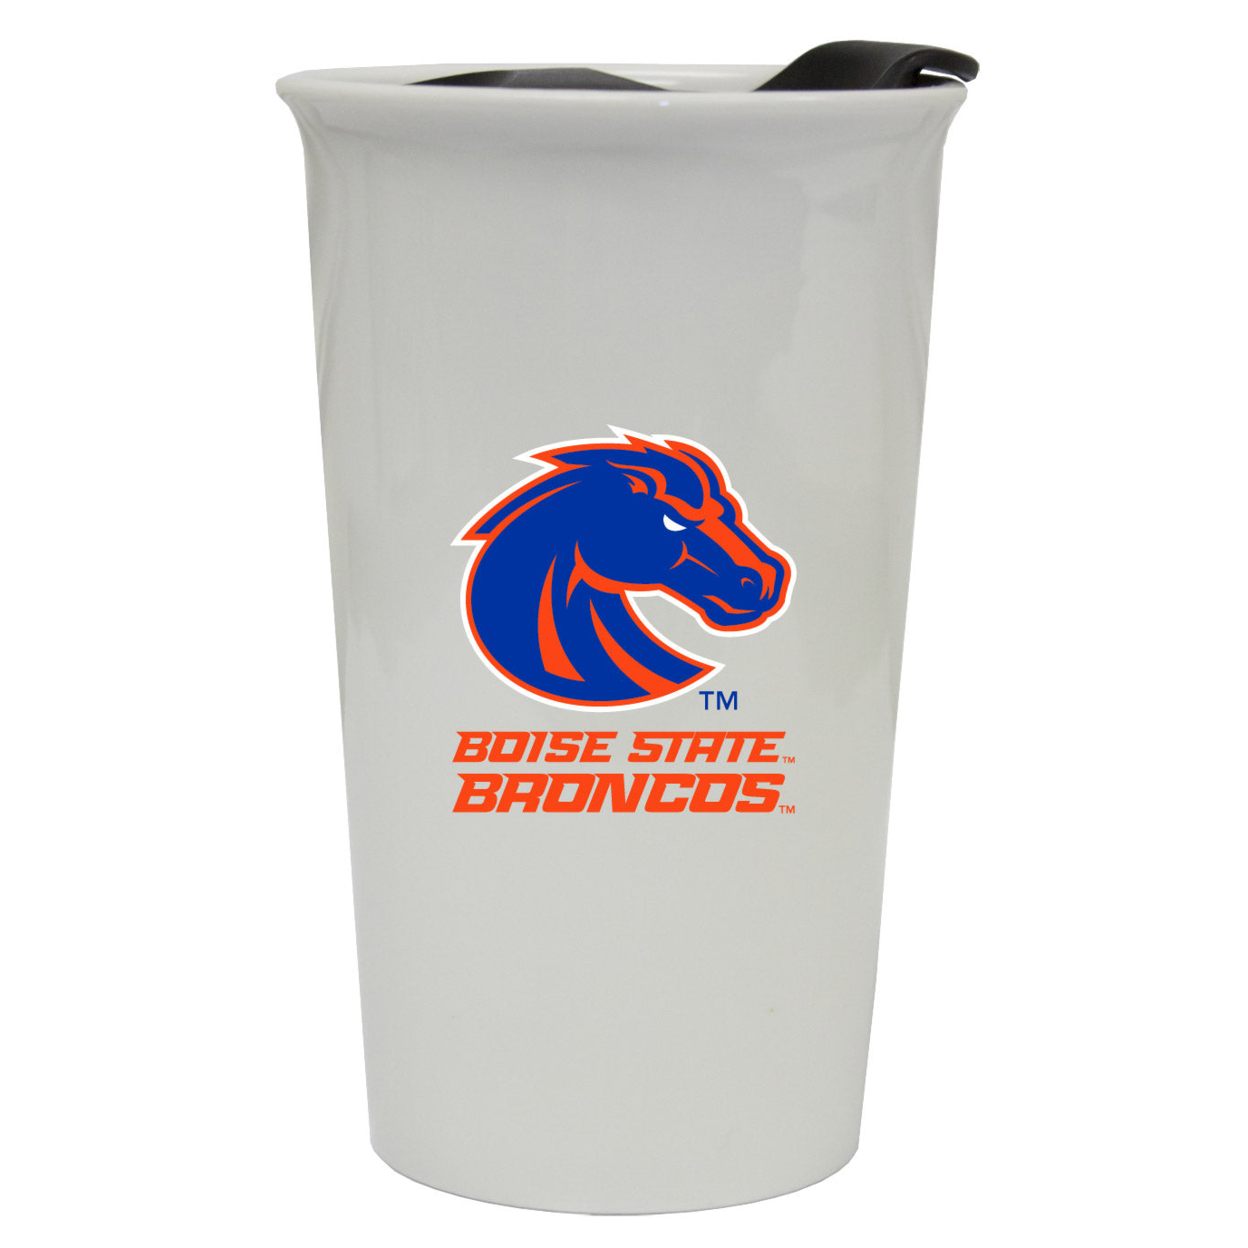 Boise State Broncos Double Walled Ceramic Tumbler